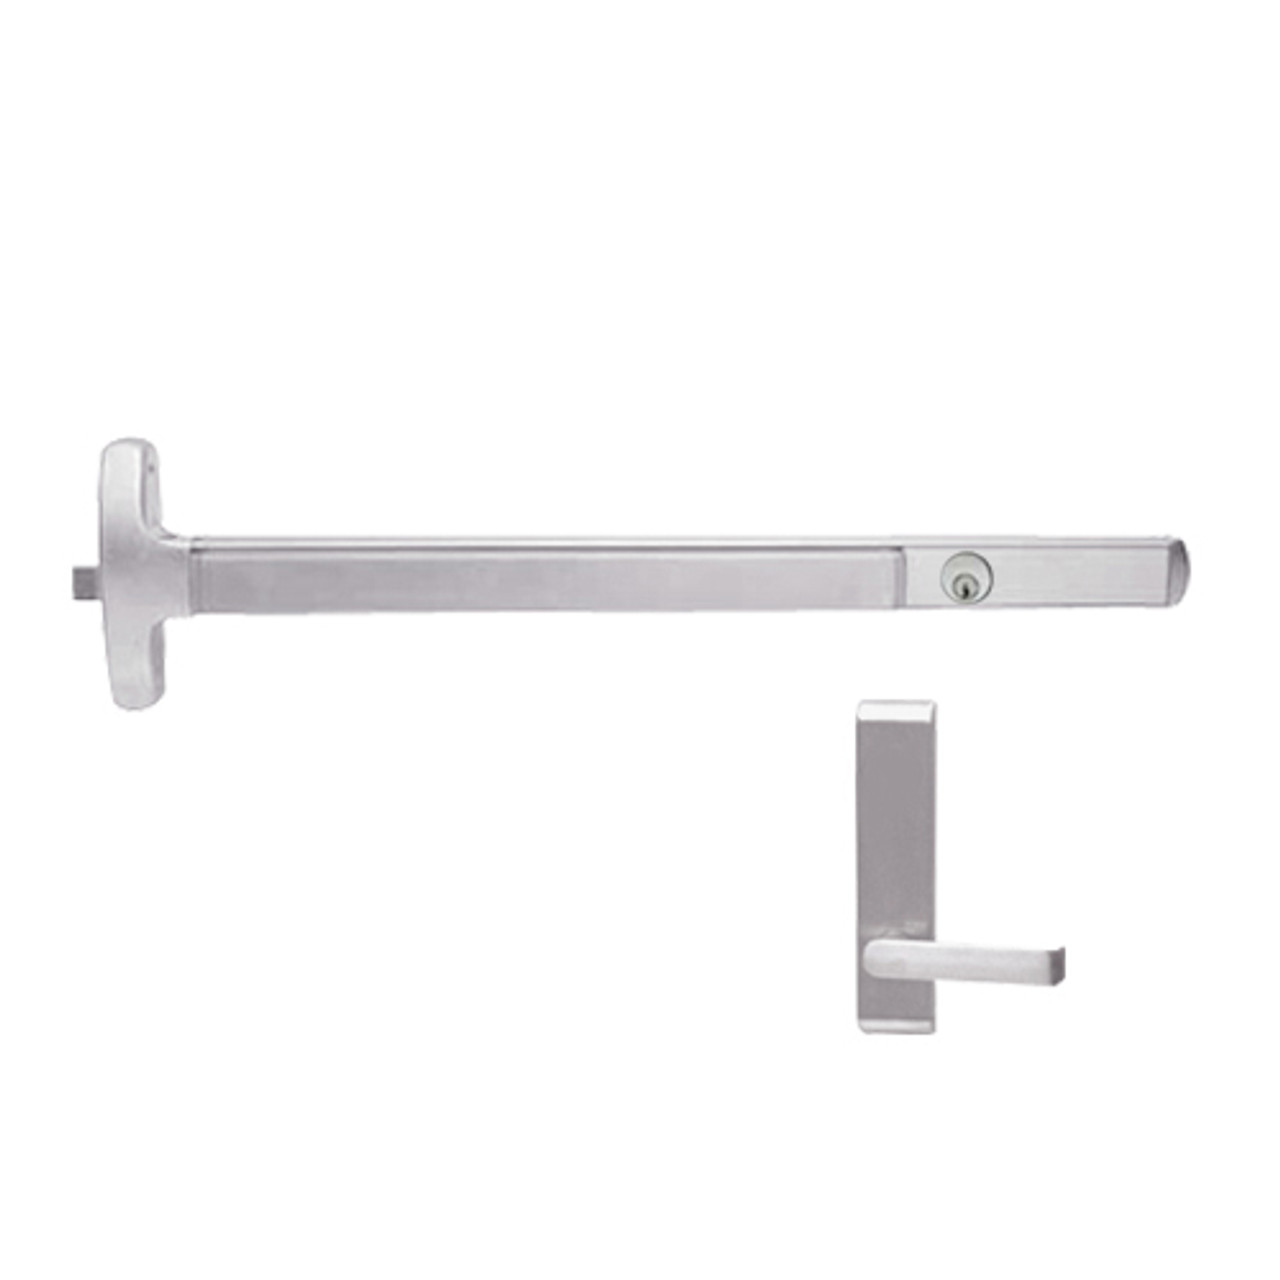 CD24-R-L-BE-DANE-US32-3-RHR Falcon Exit Device in Polished Stainless Steel